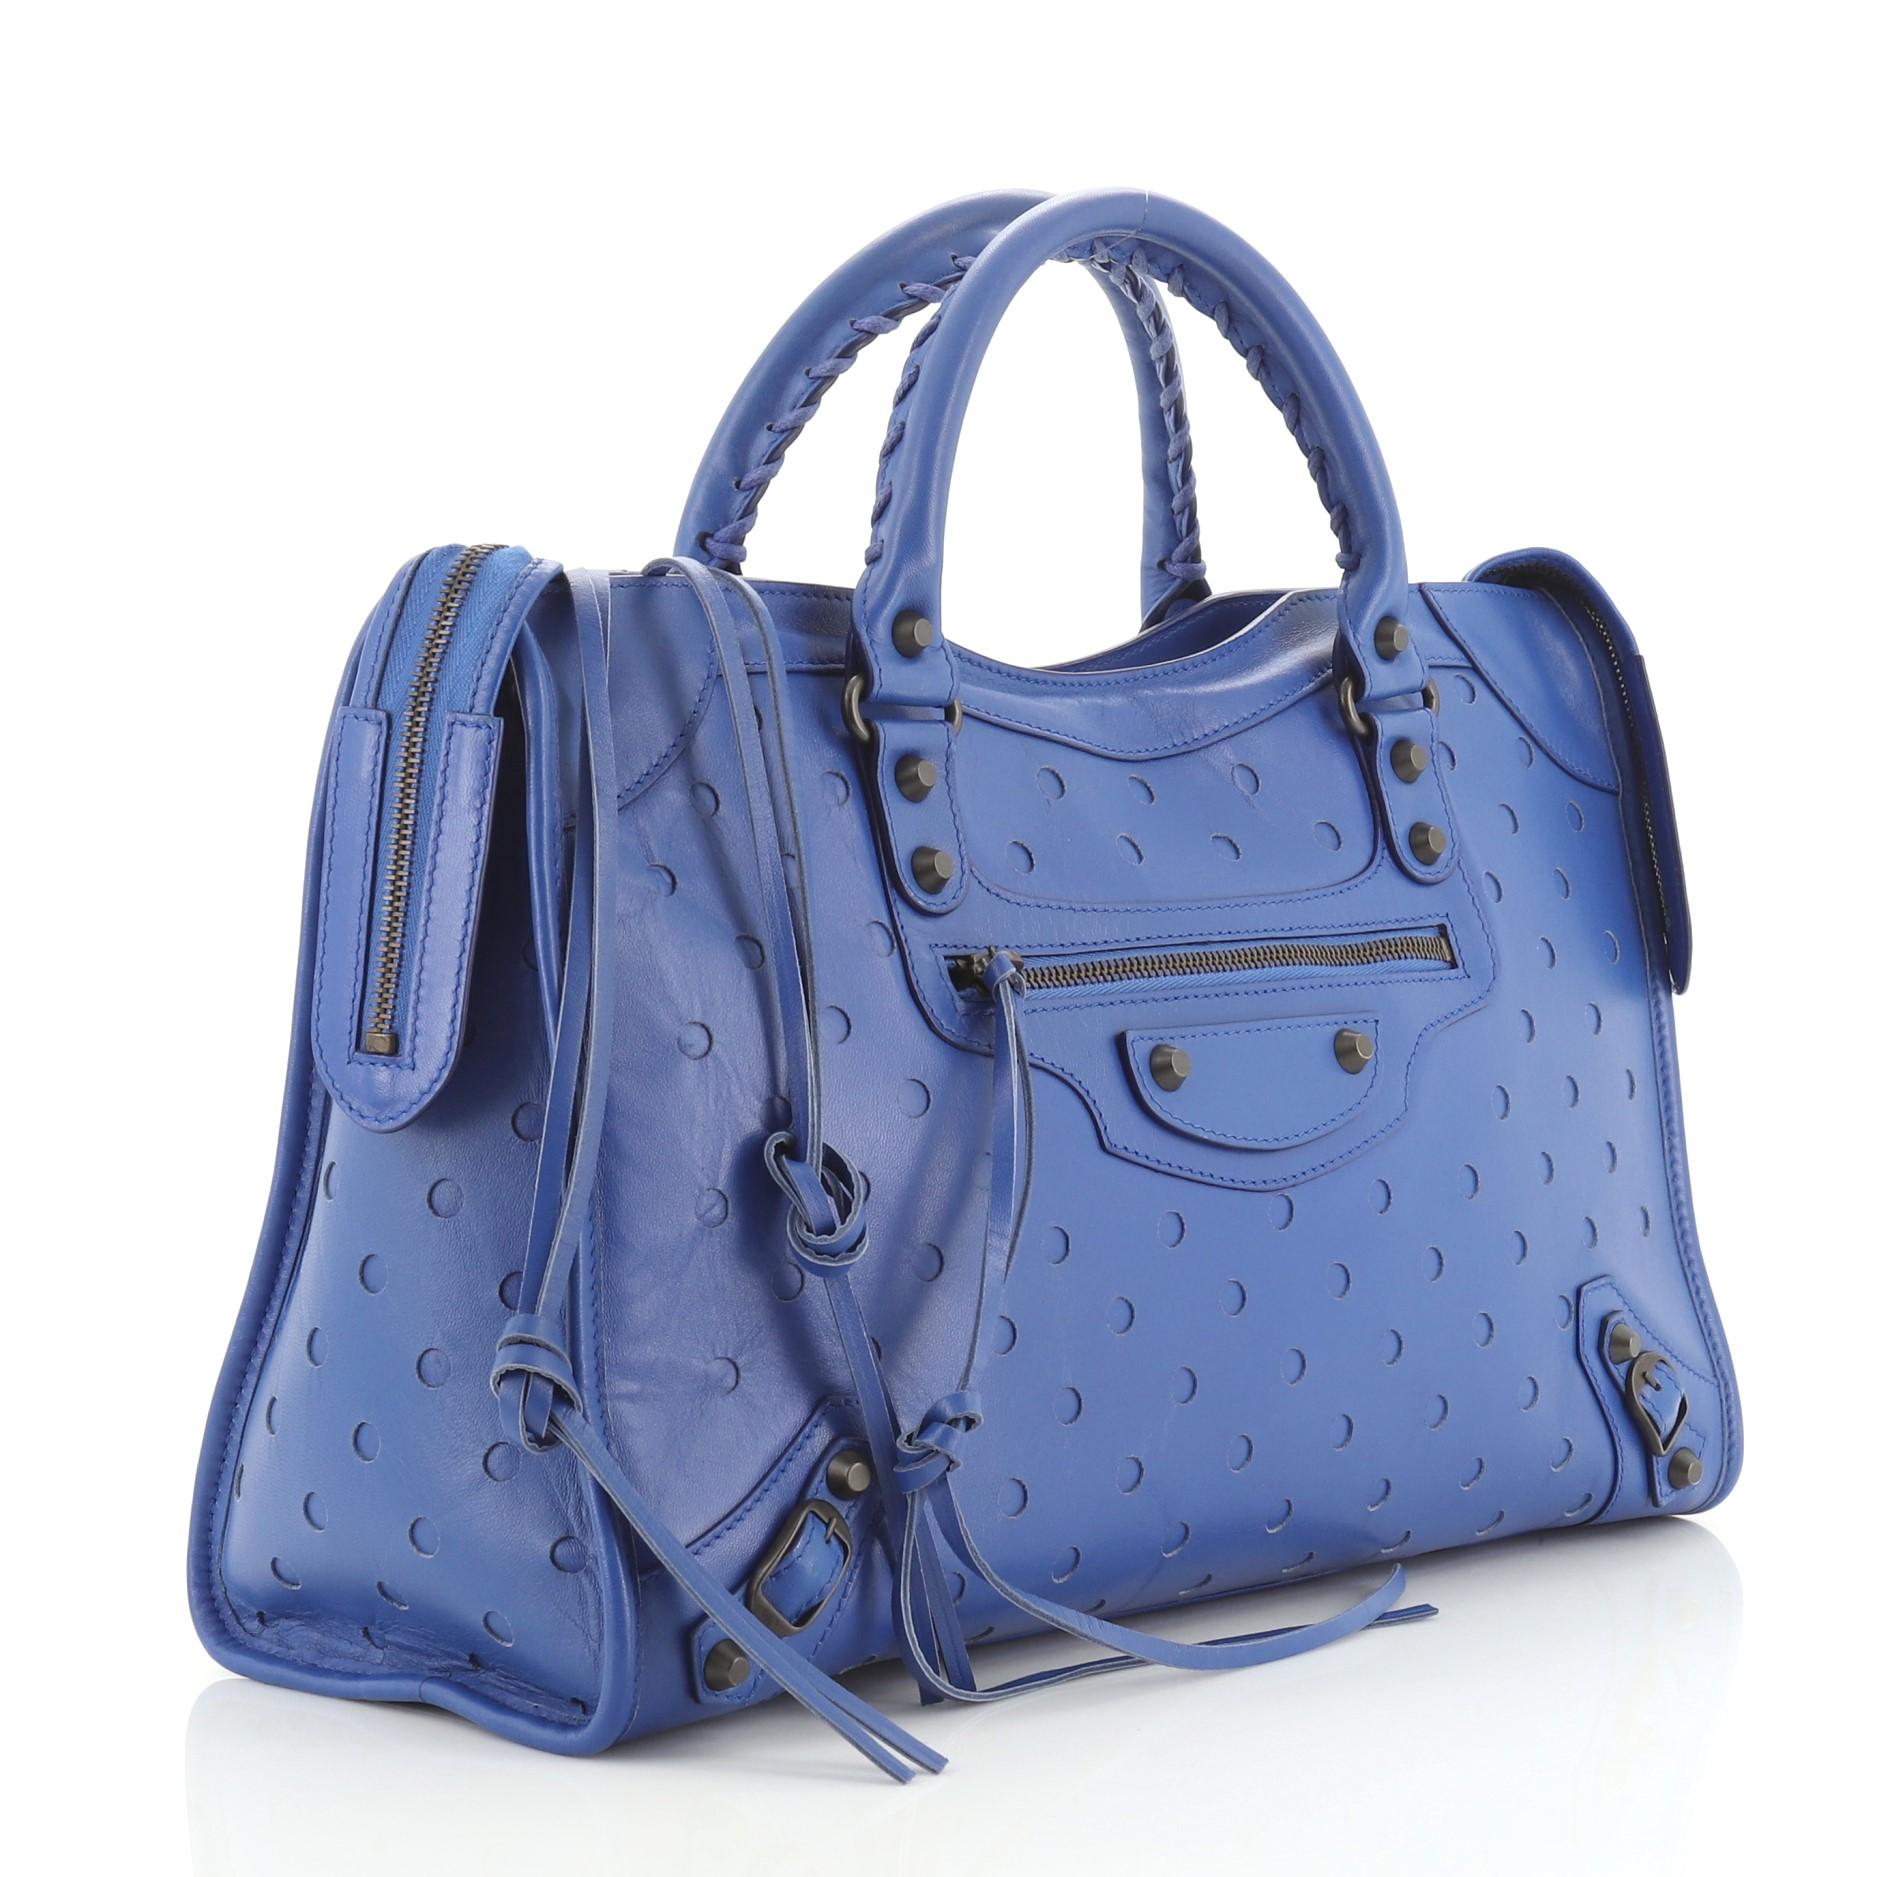 This Balenciaga Polka Dot City Classic Studs Bag Perforated Leather Medium, crafted in blue leather, features perforated polka dots design, braided woven handles, long fringe detailing, front zip pocket, classic studs and buckle details, and